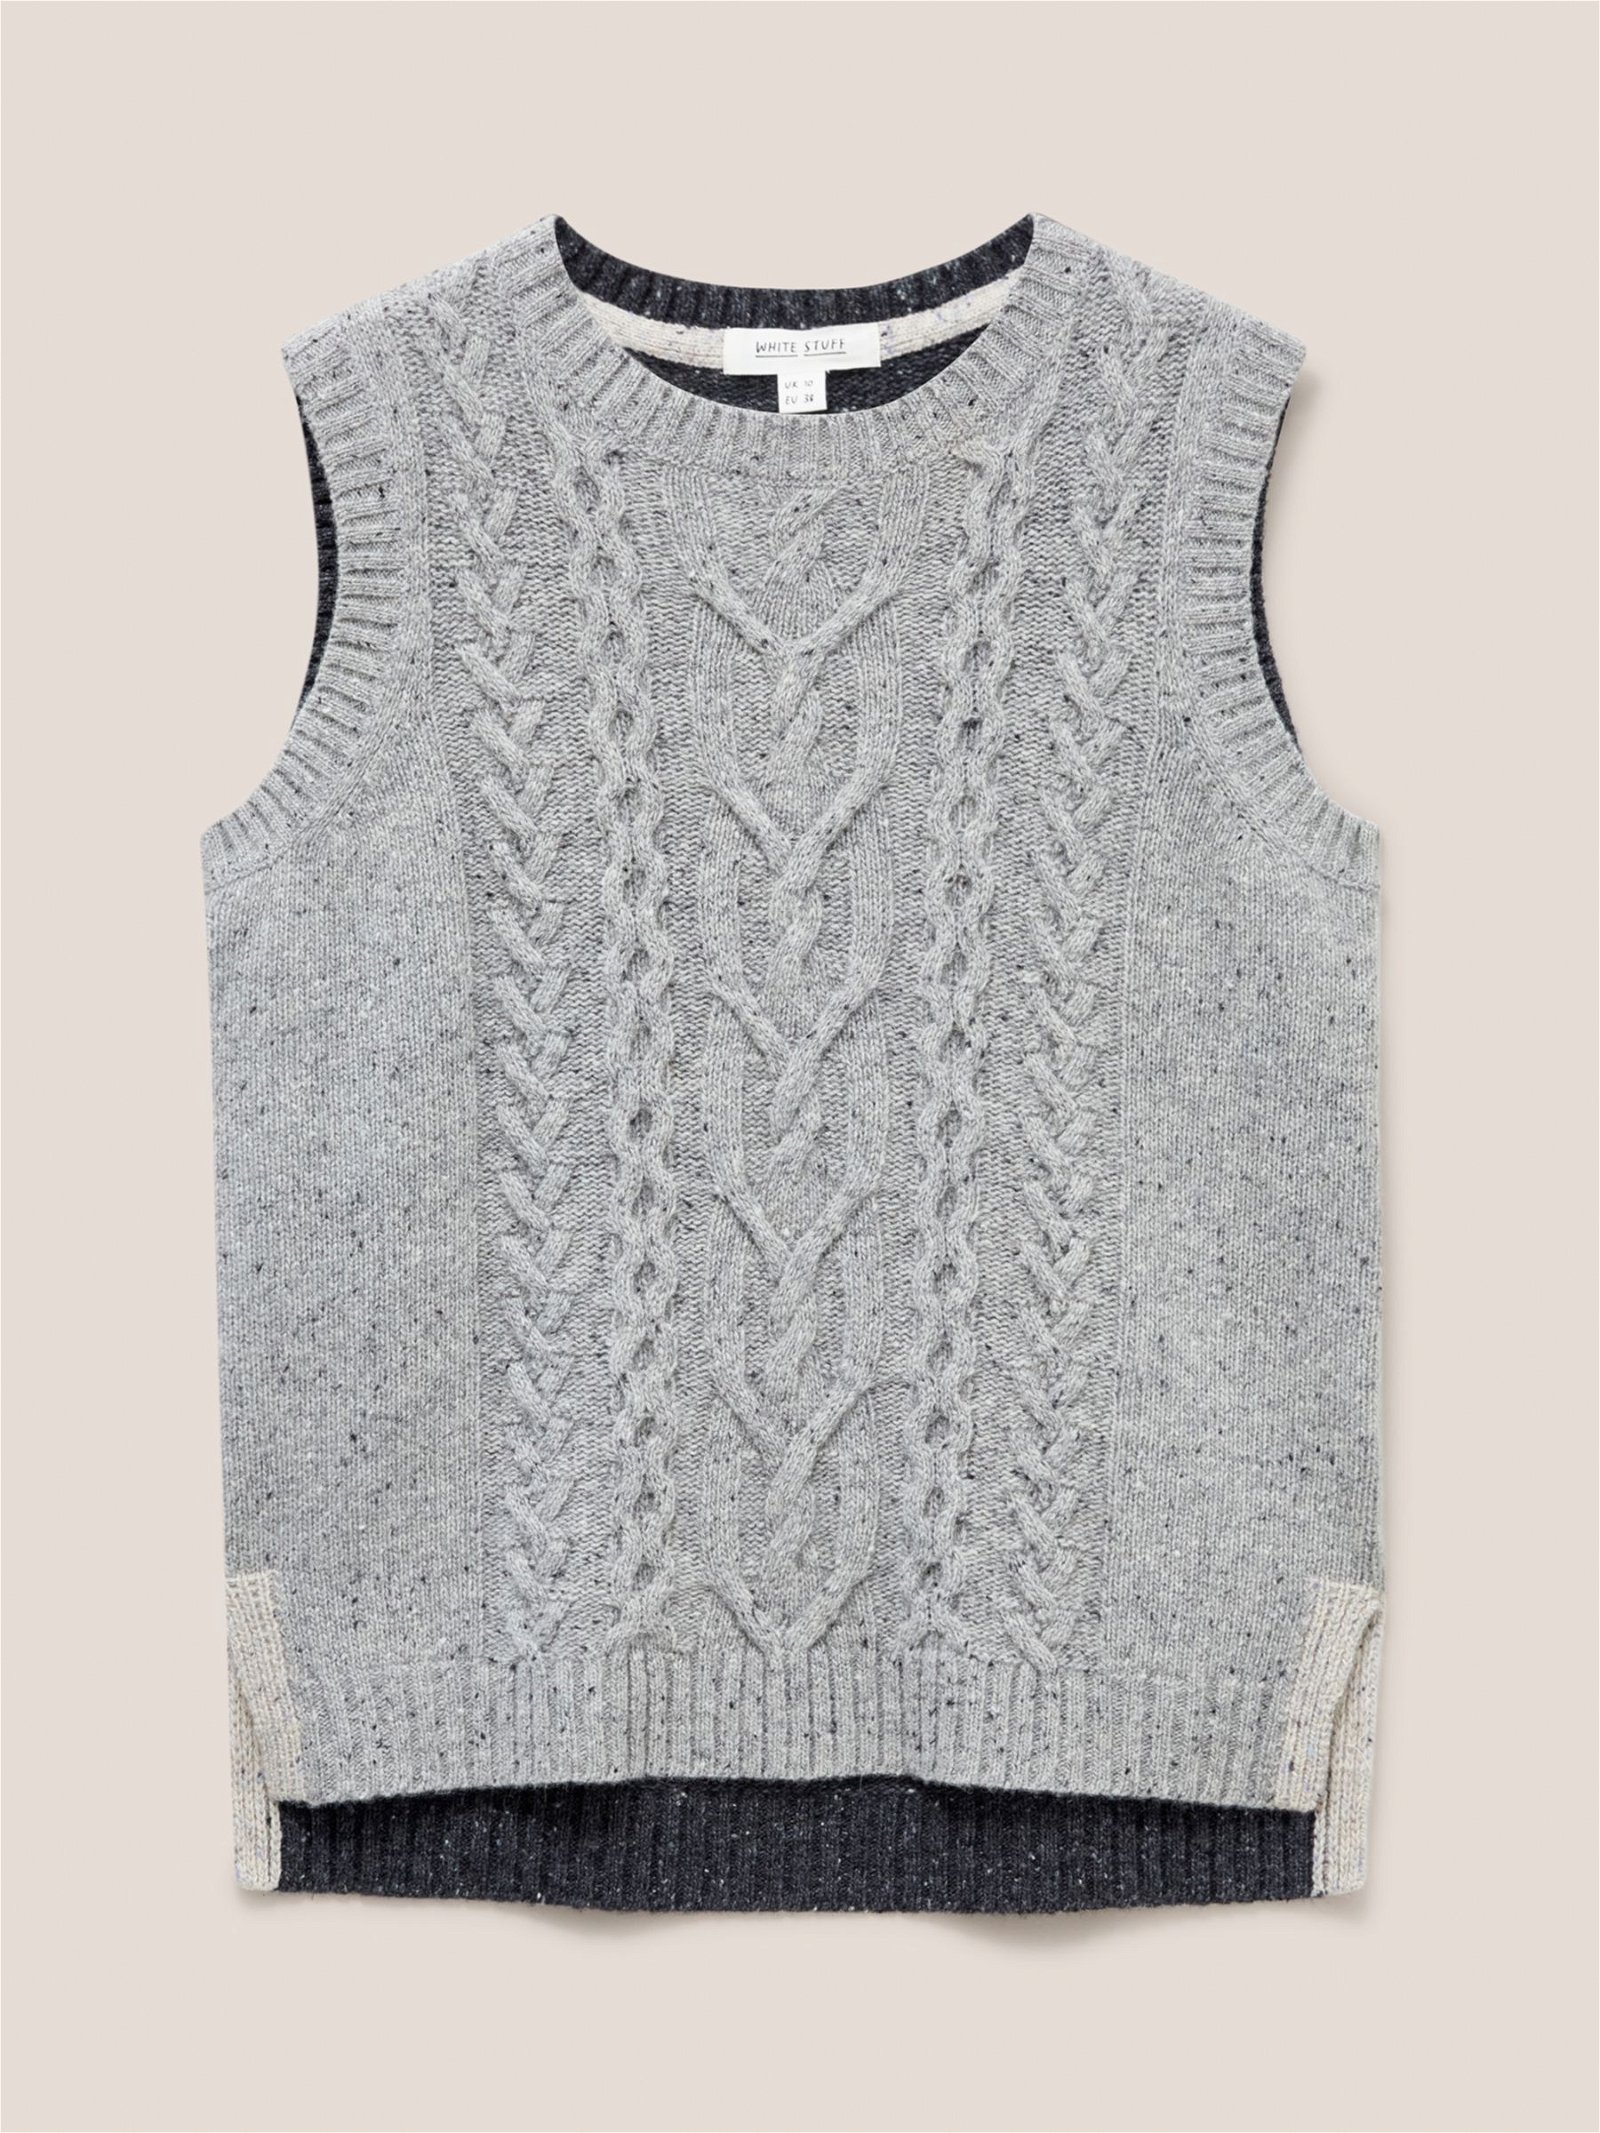 WHITE STUFF Cable Knit Wool Blend Tank Top in Grey/Multi